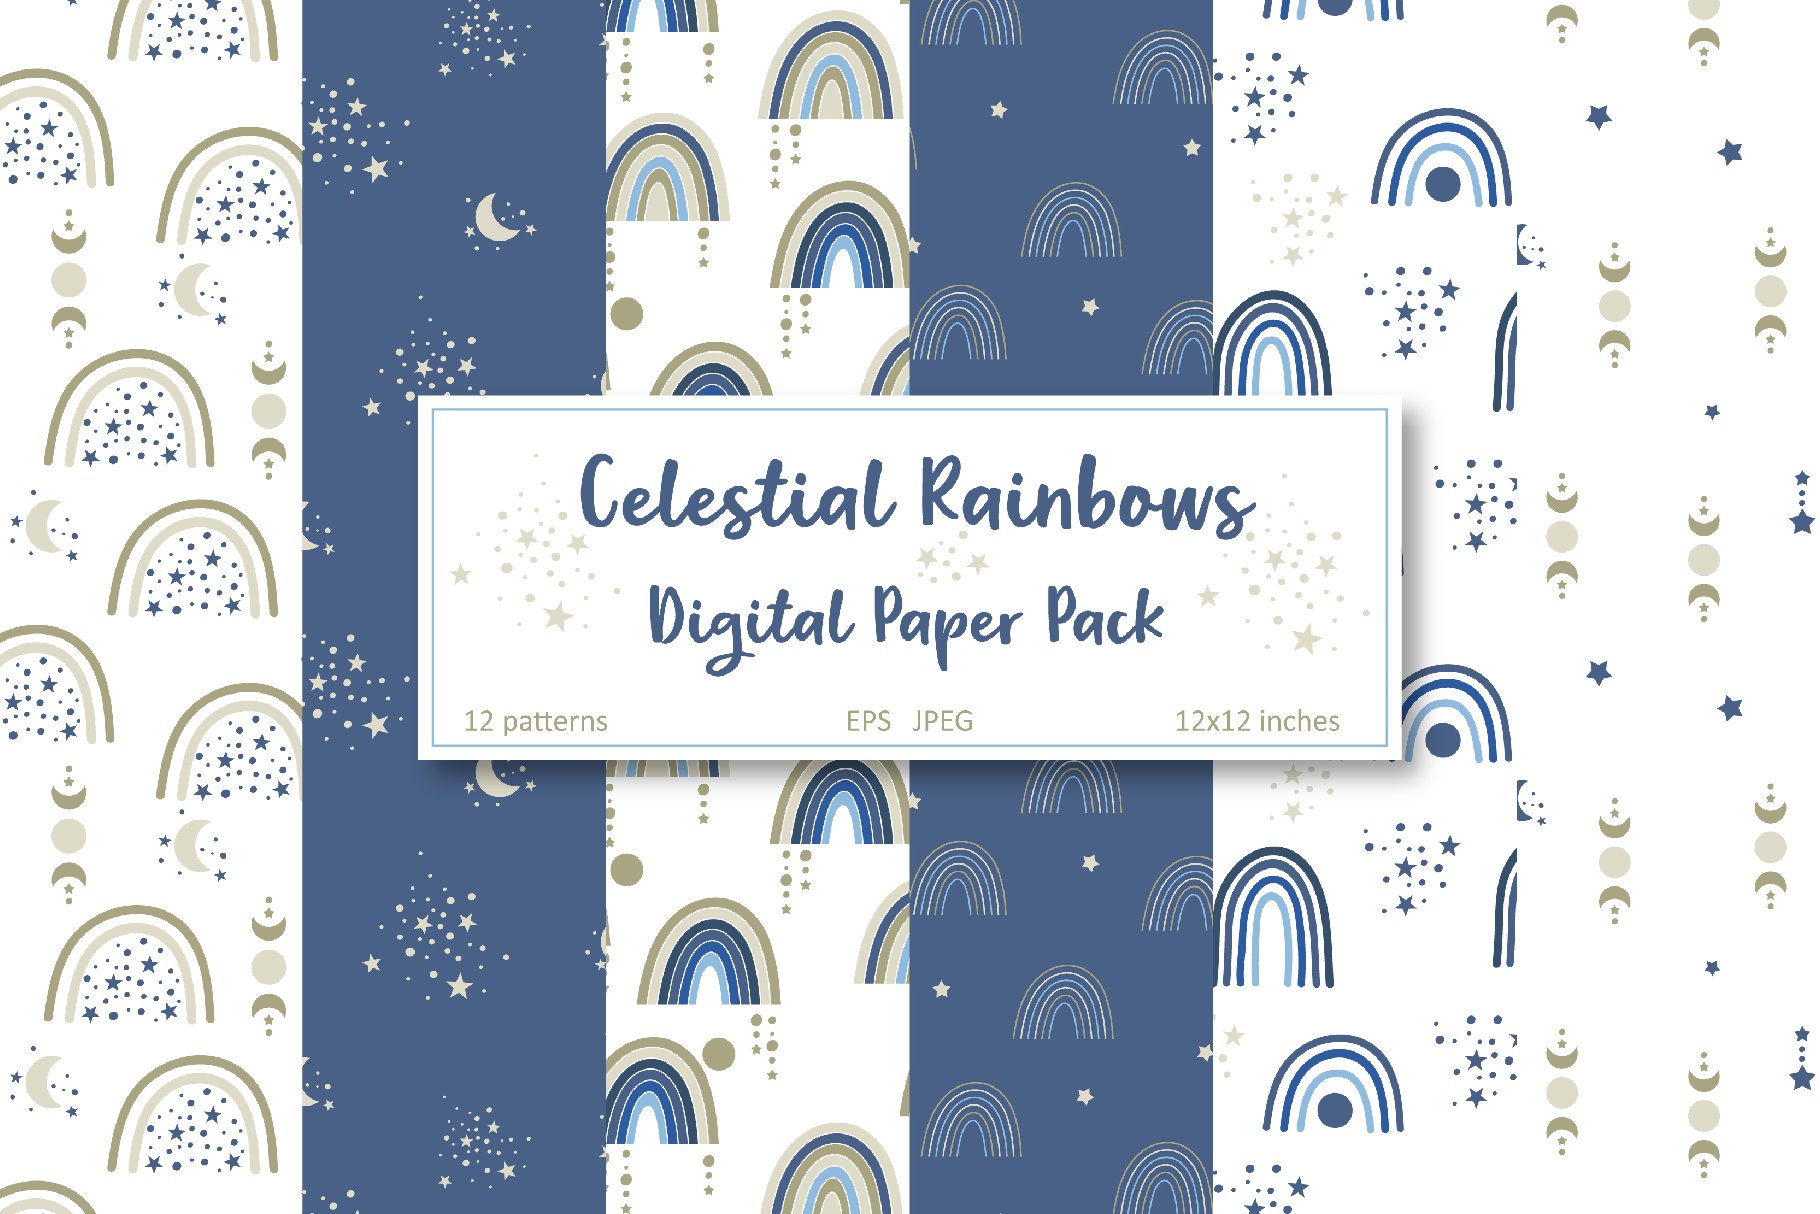 Celestial Rainbow Pattern Collection cover image.